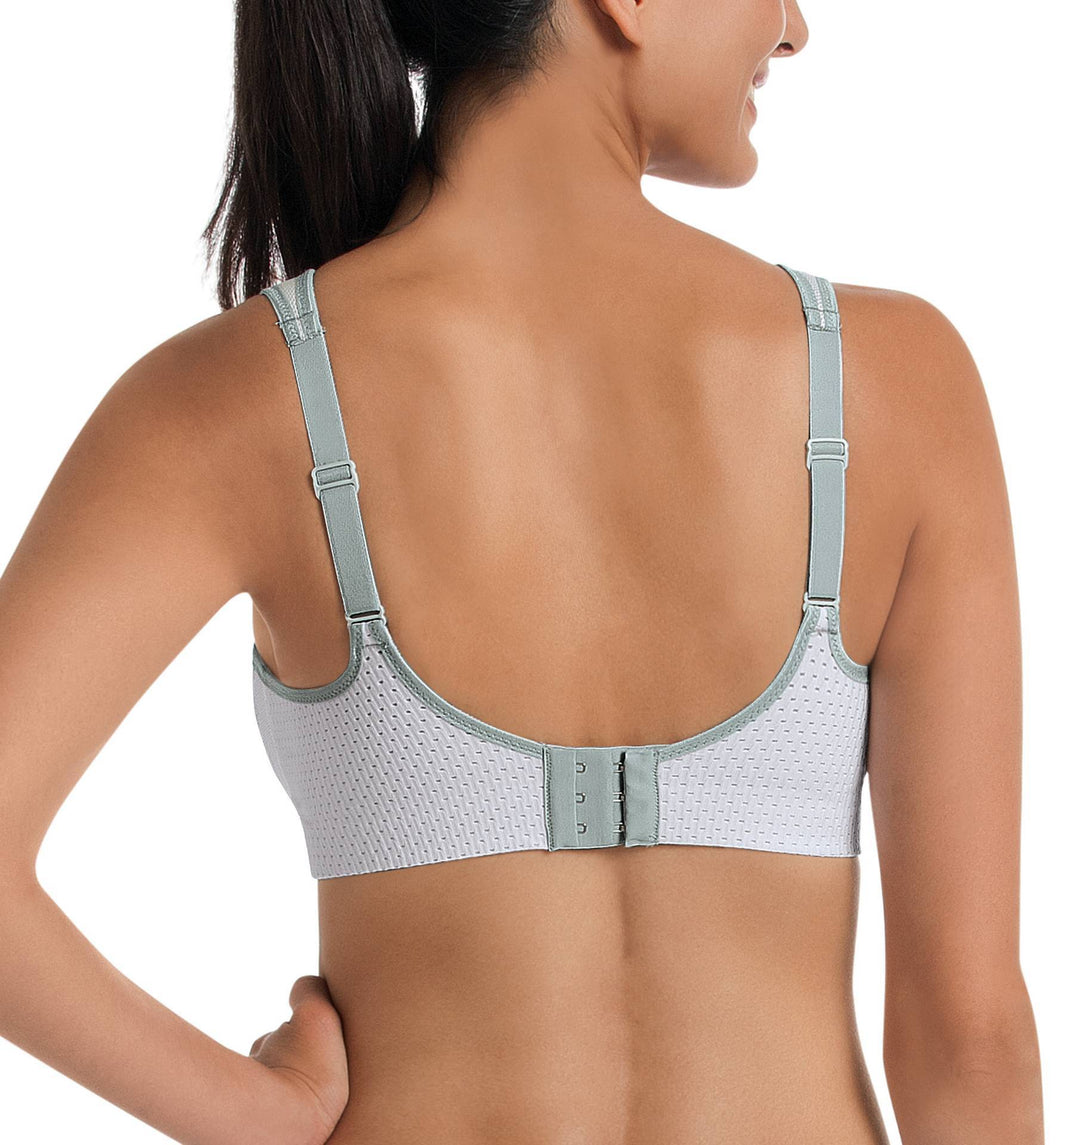 30A Bra Size in A Cup Sizes Smart Rose Active by Anita Comfort